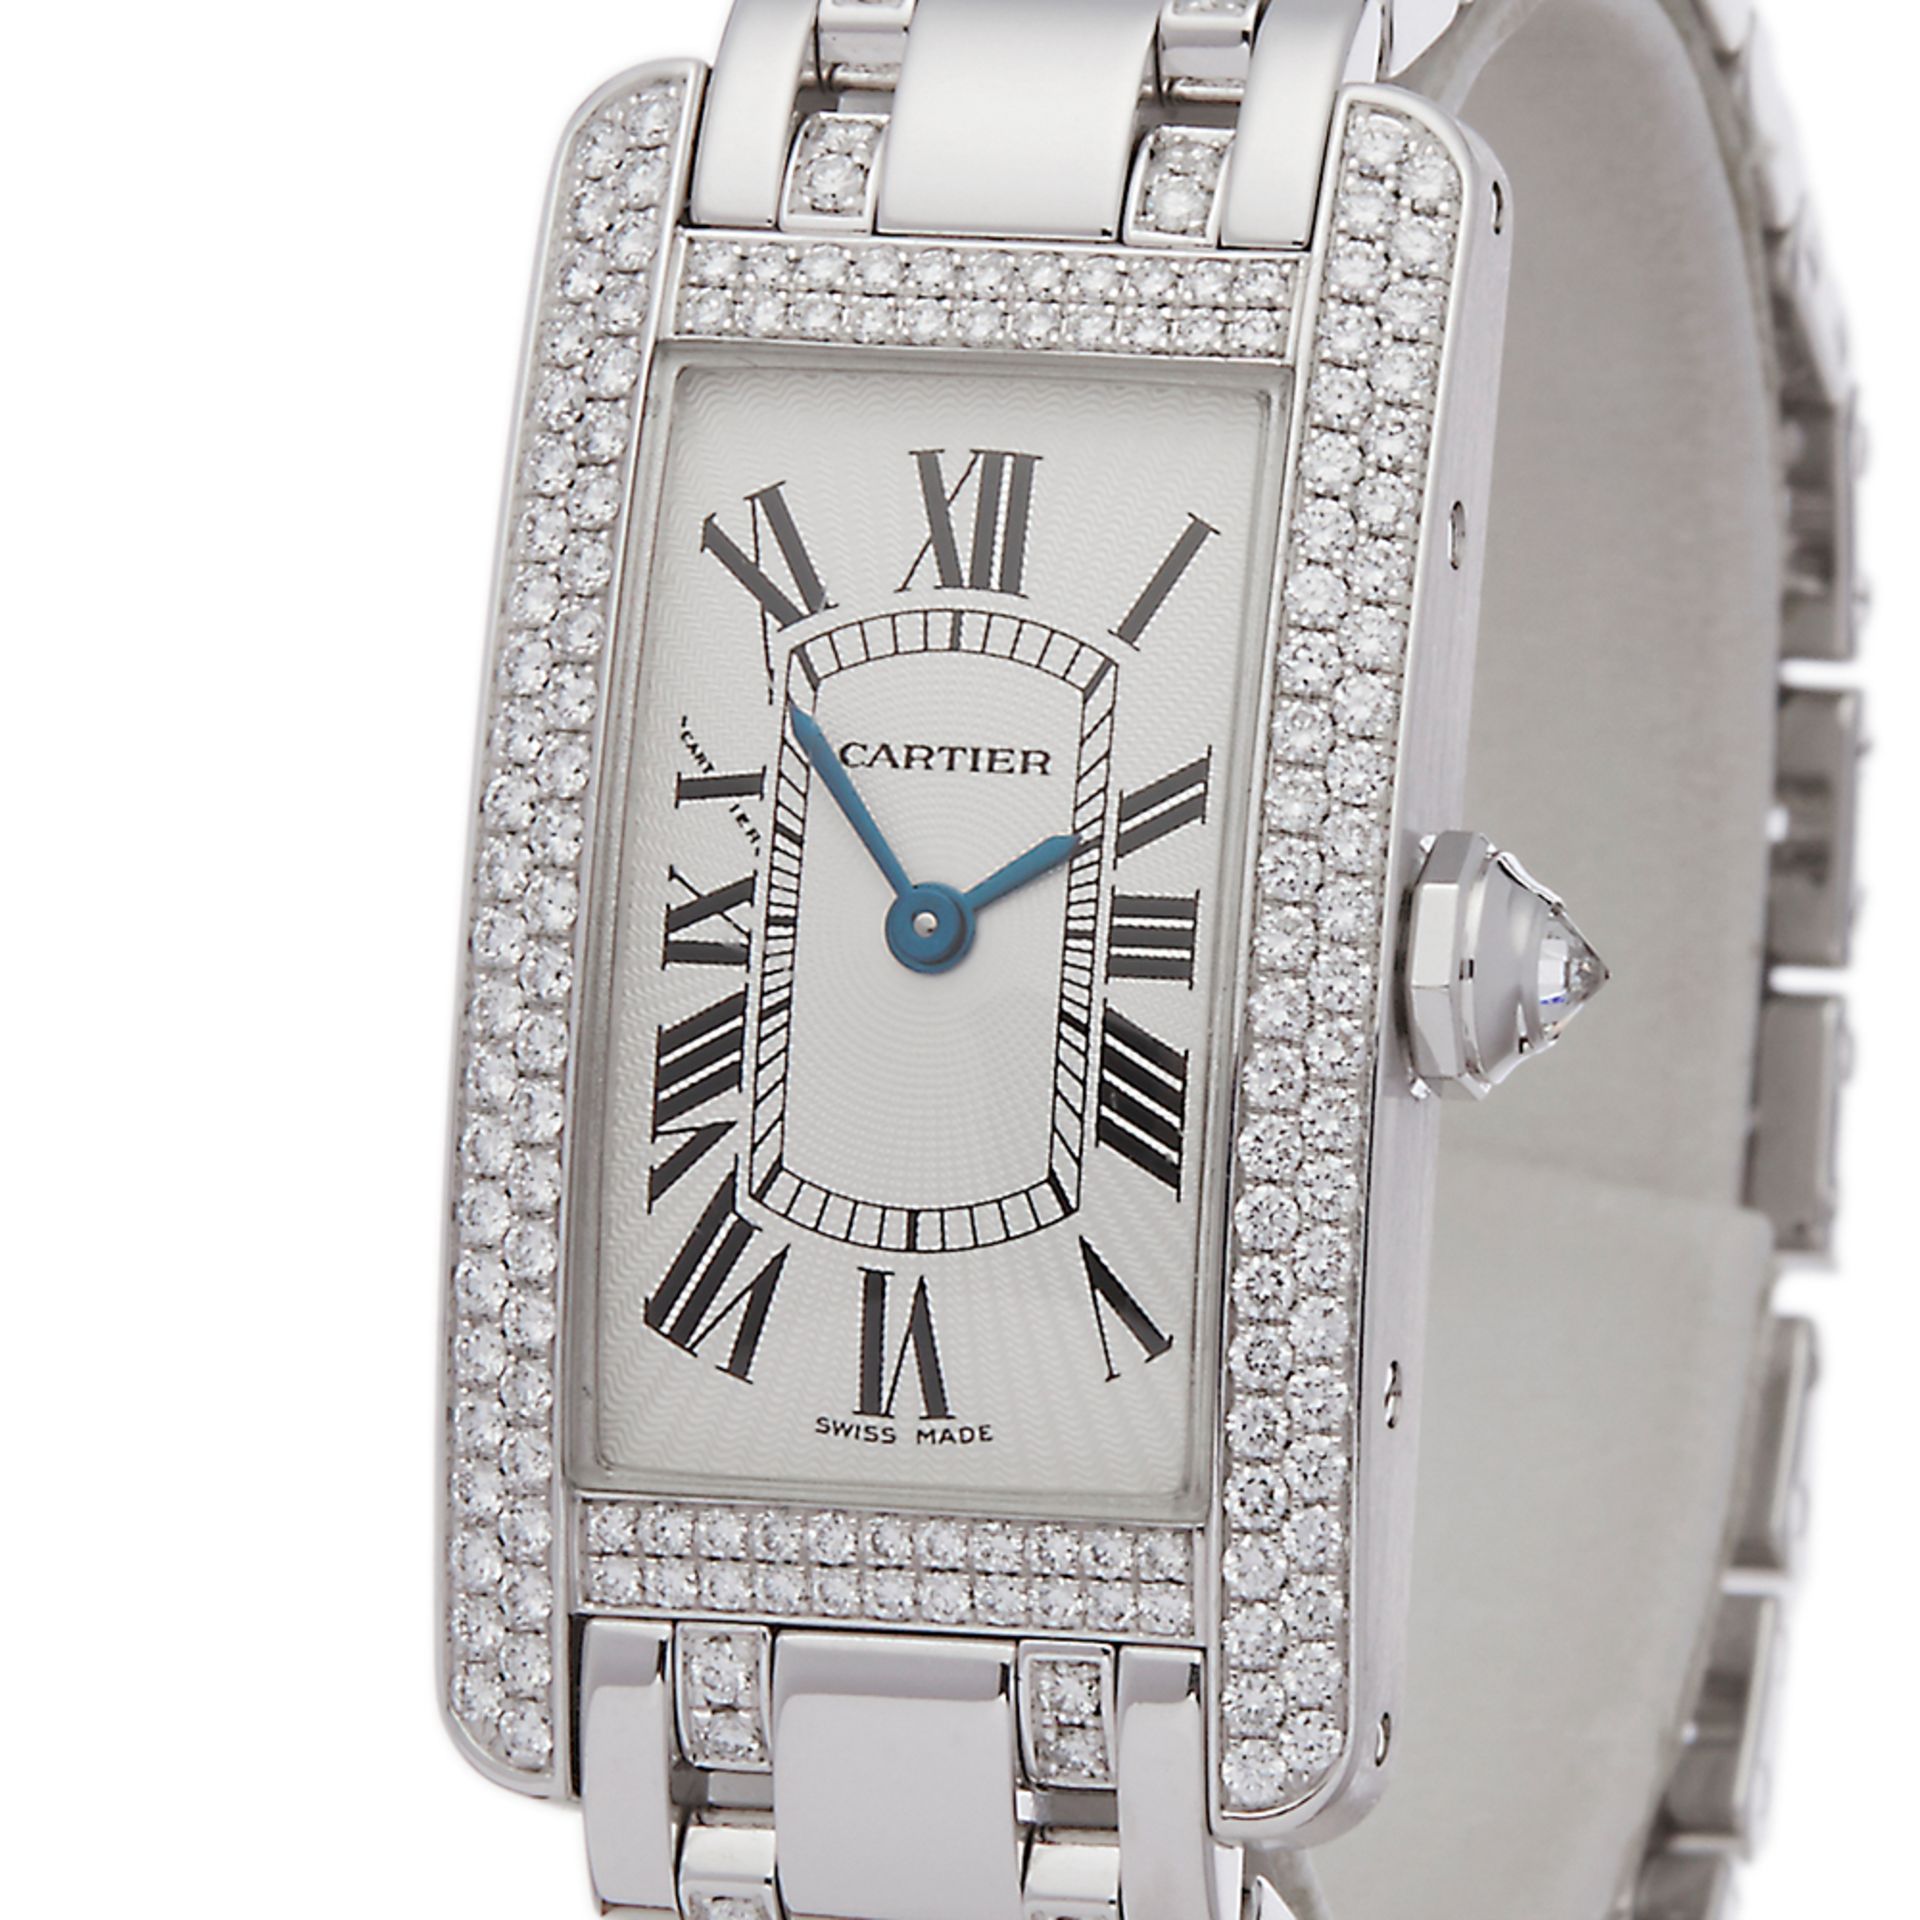 Cartier Tank Americaine 18k White Gold - 2489 - Image 3 of 8